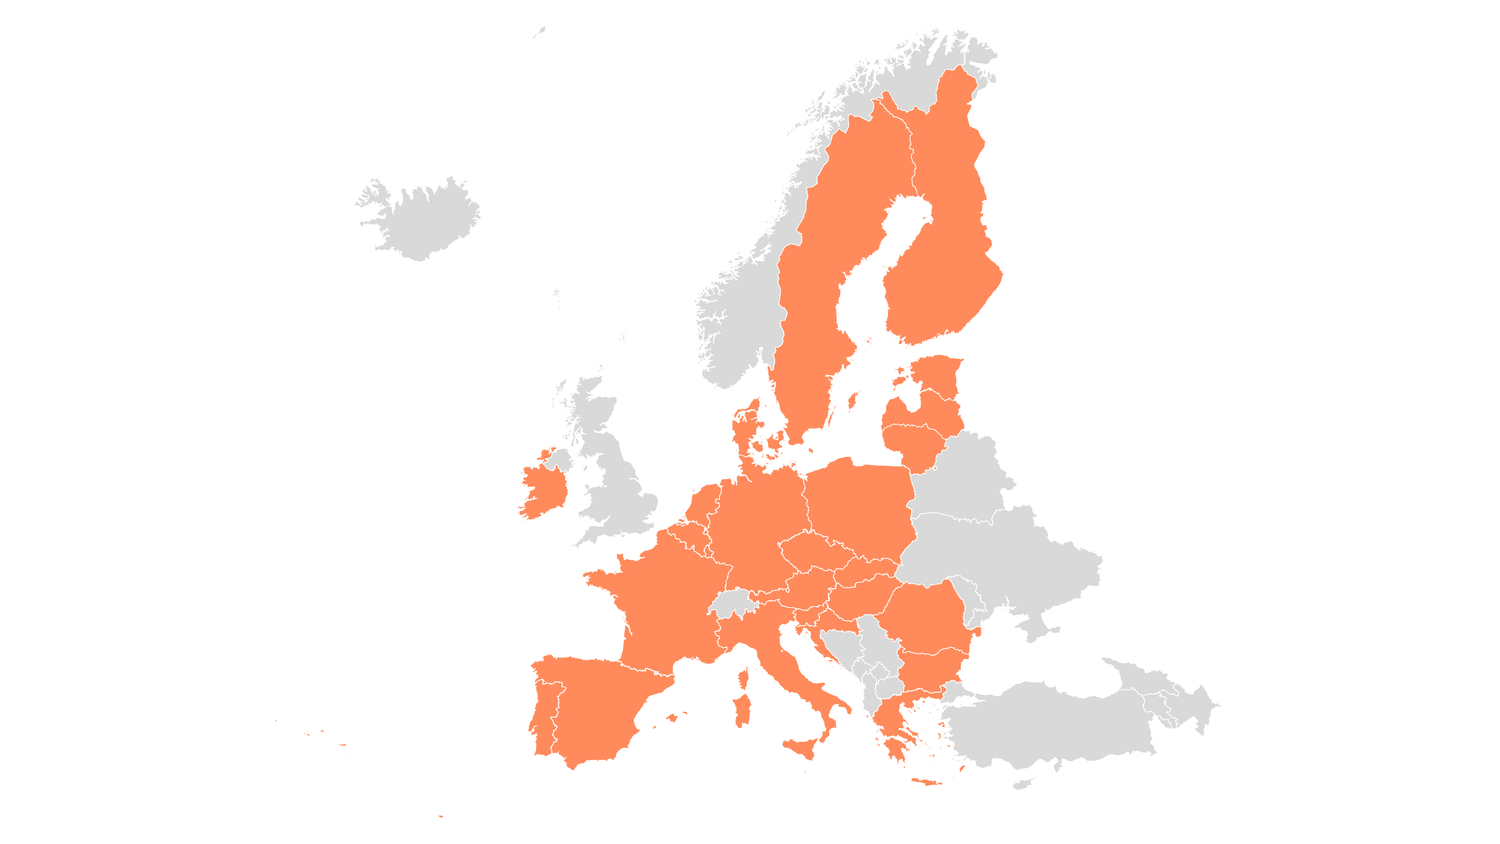 A map of the European Union with countries where we deliver scented candles